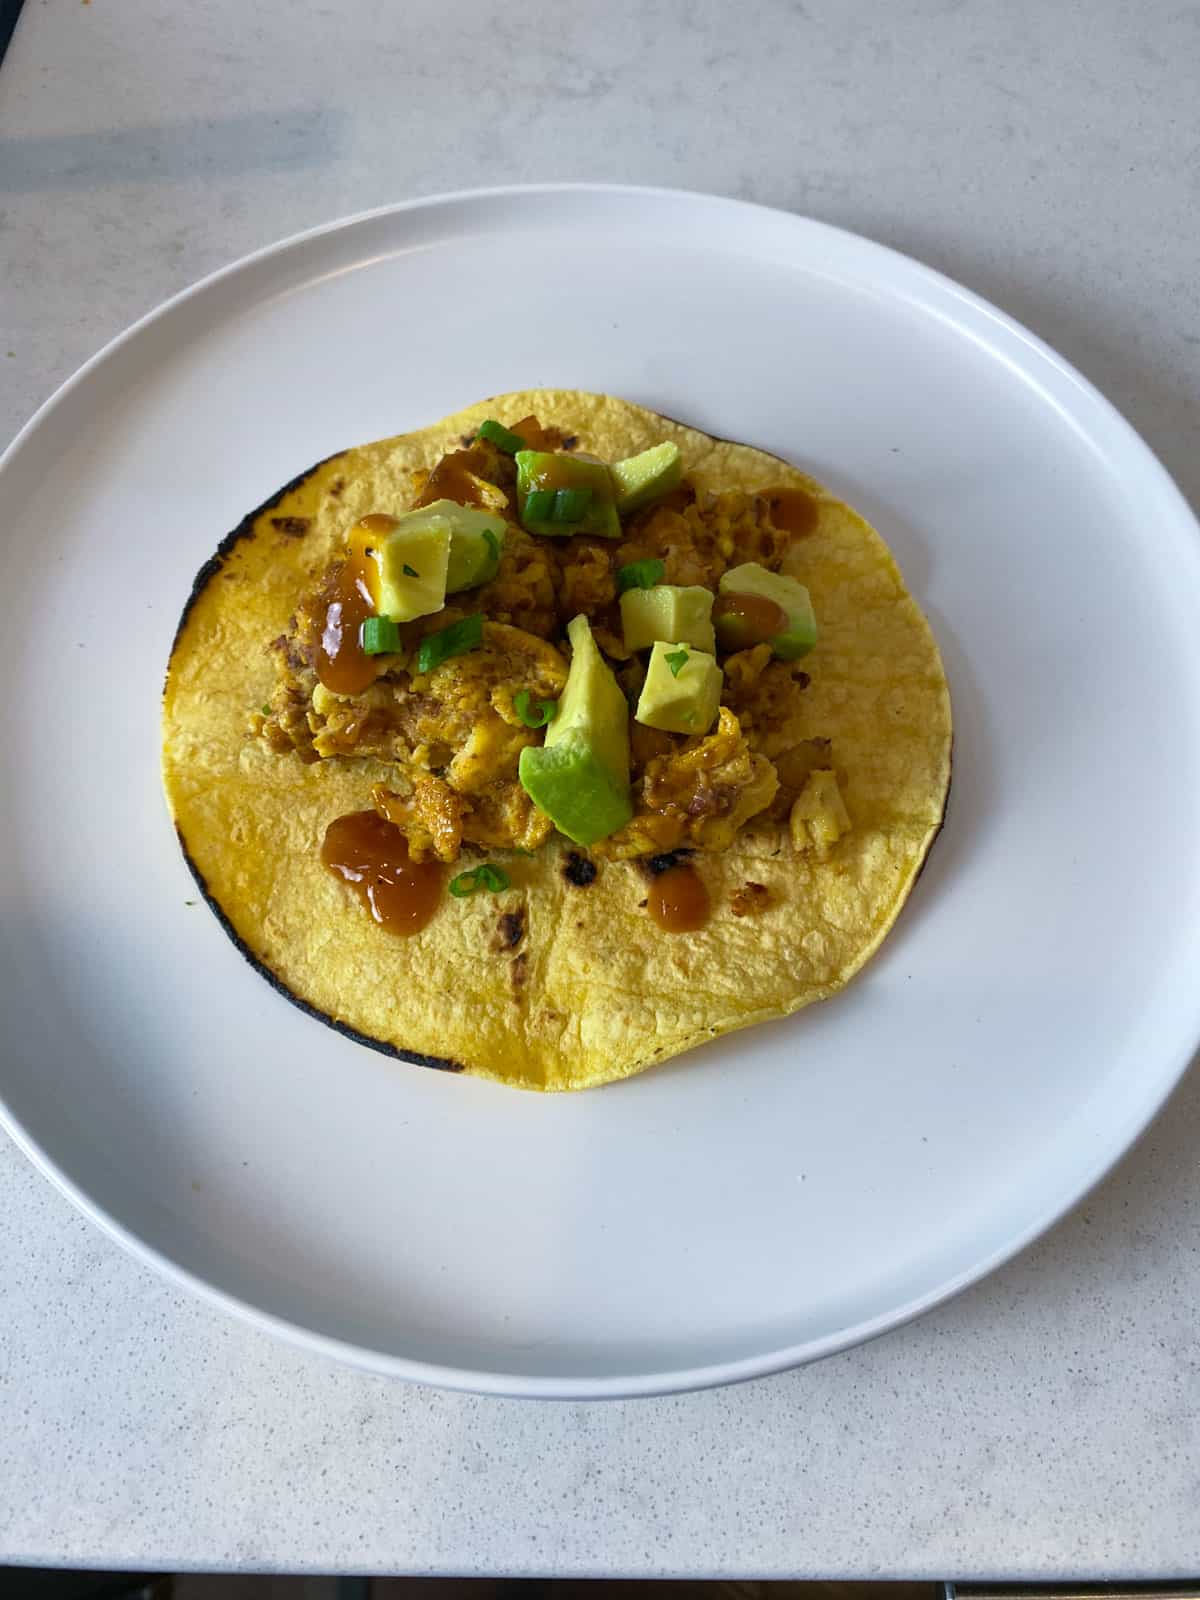 Garnish the breakfast taco with cubed avocado and hot sauce.